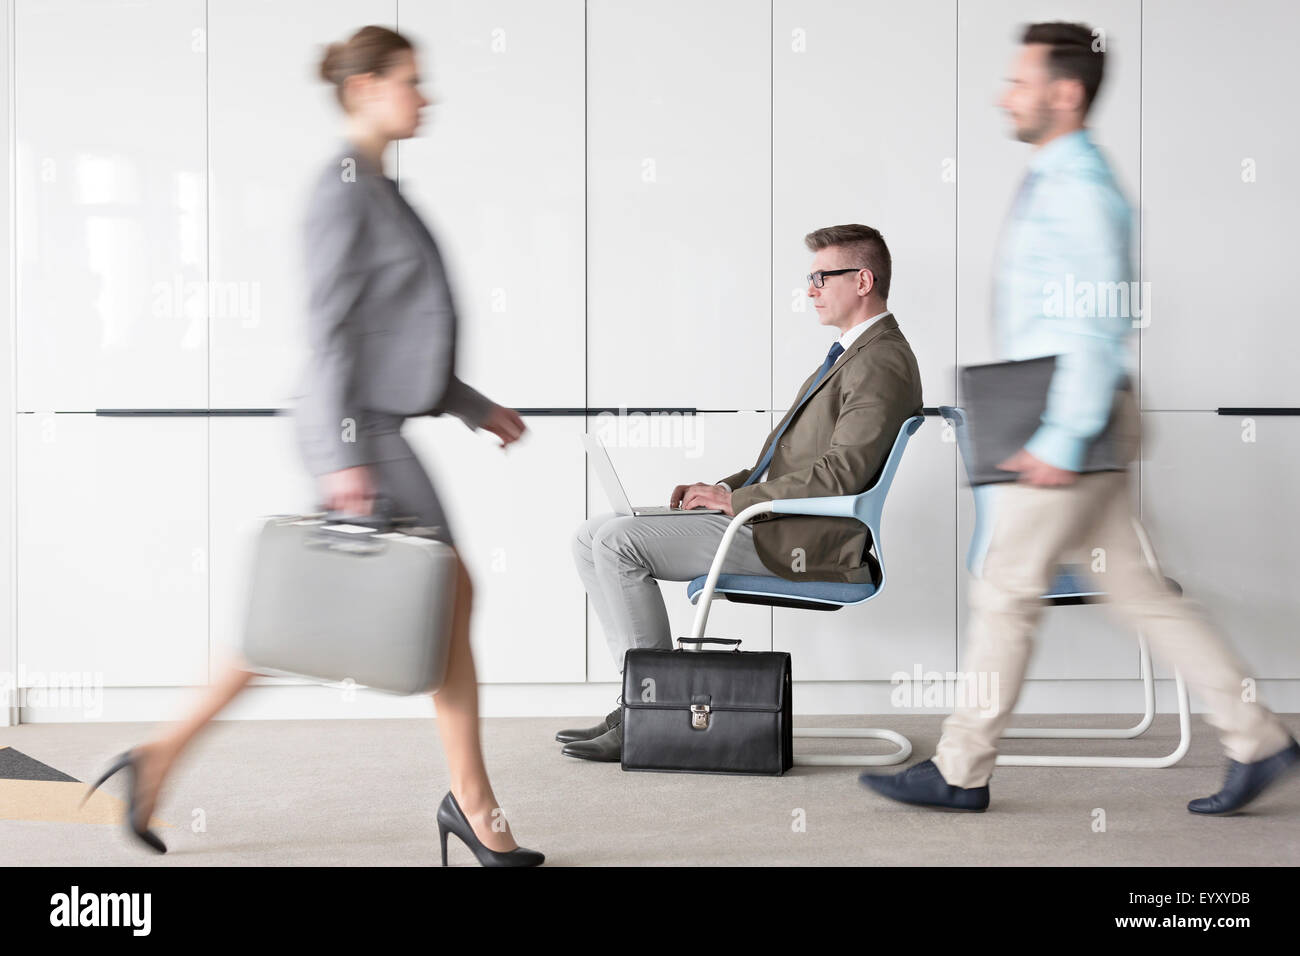 Businessman working at laptop in lobby behind business people on the move Stock Photo